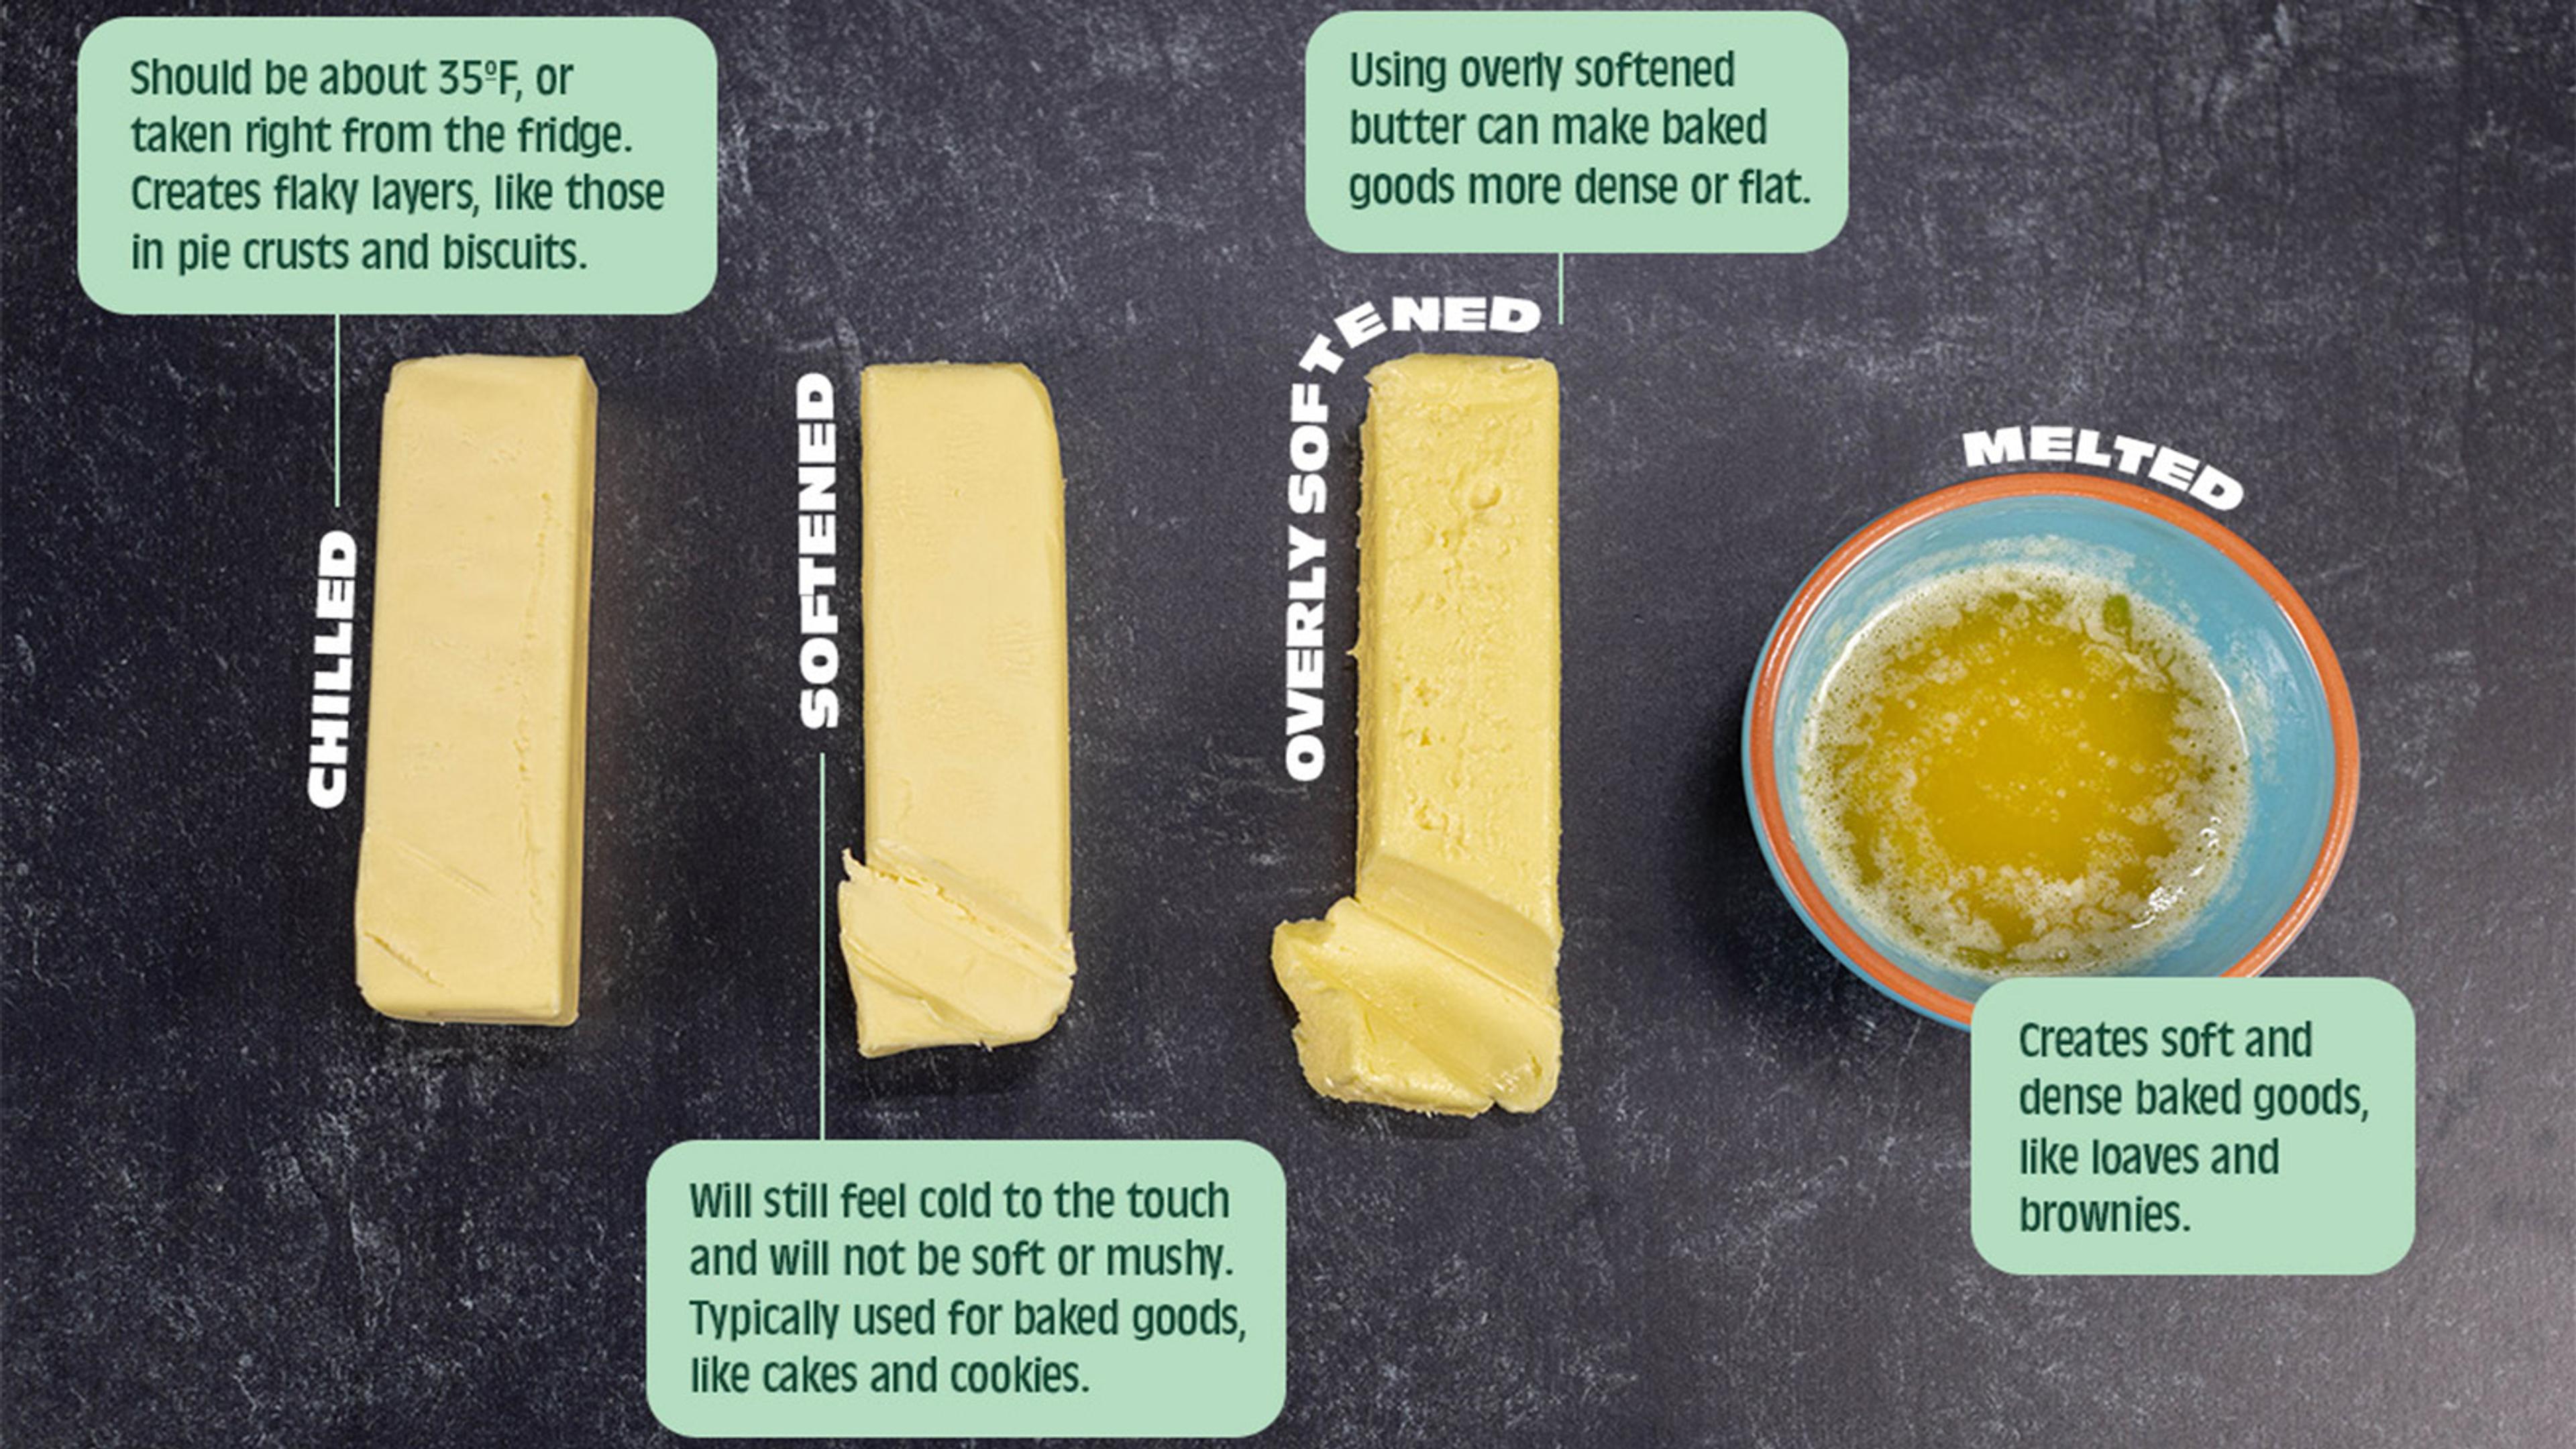 Four stages of butter softened are shown side by side.